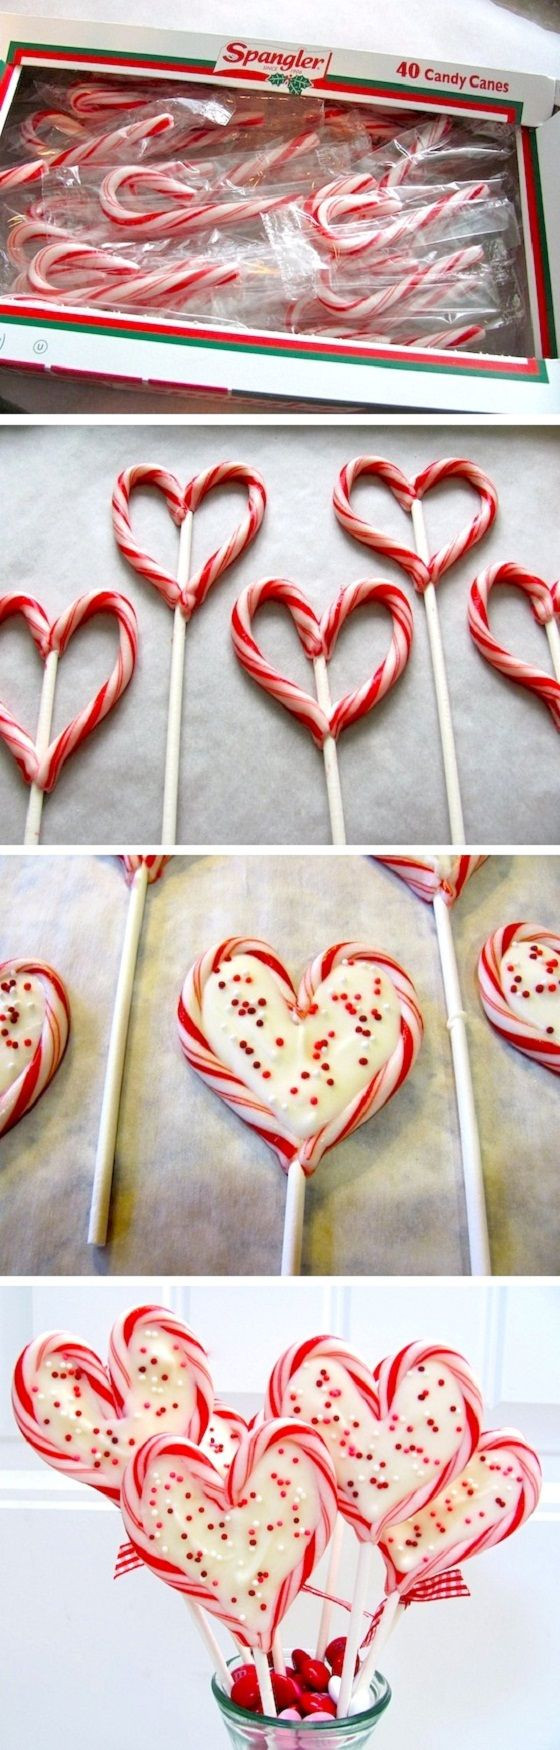 Heart Candy Christmas
 Candy Cane heart shaped lipop Just bake at 300F for 3